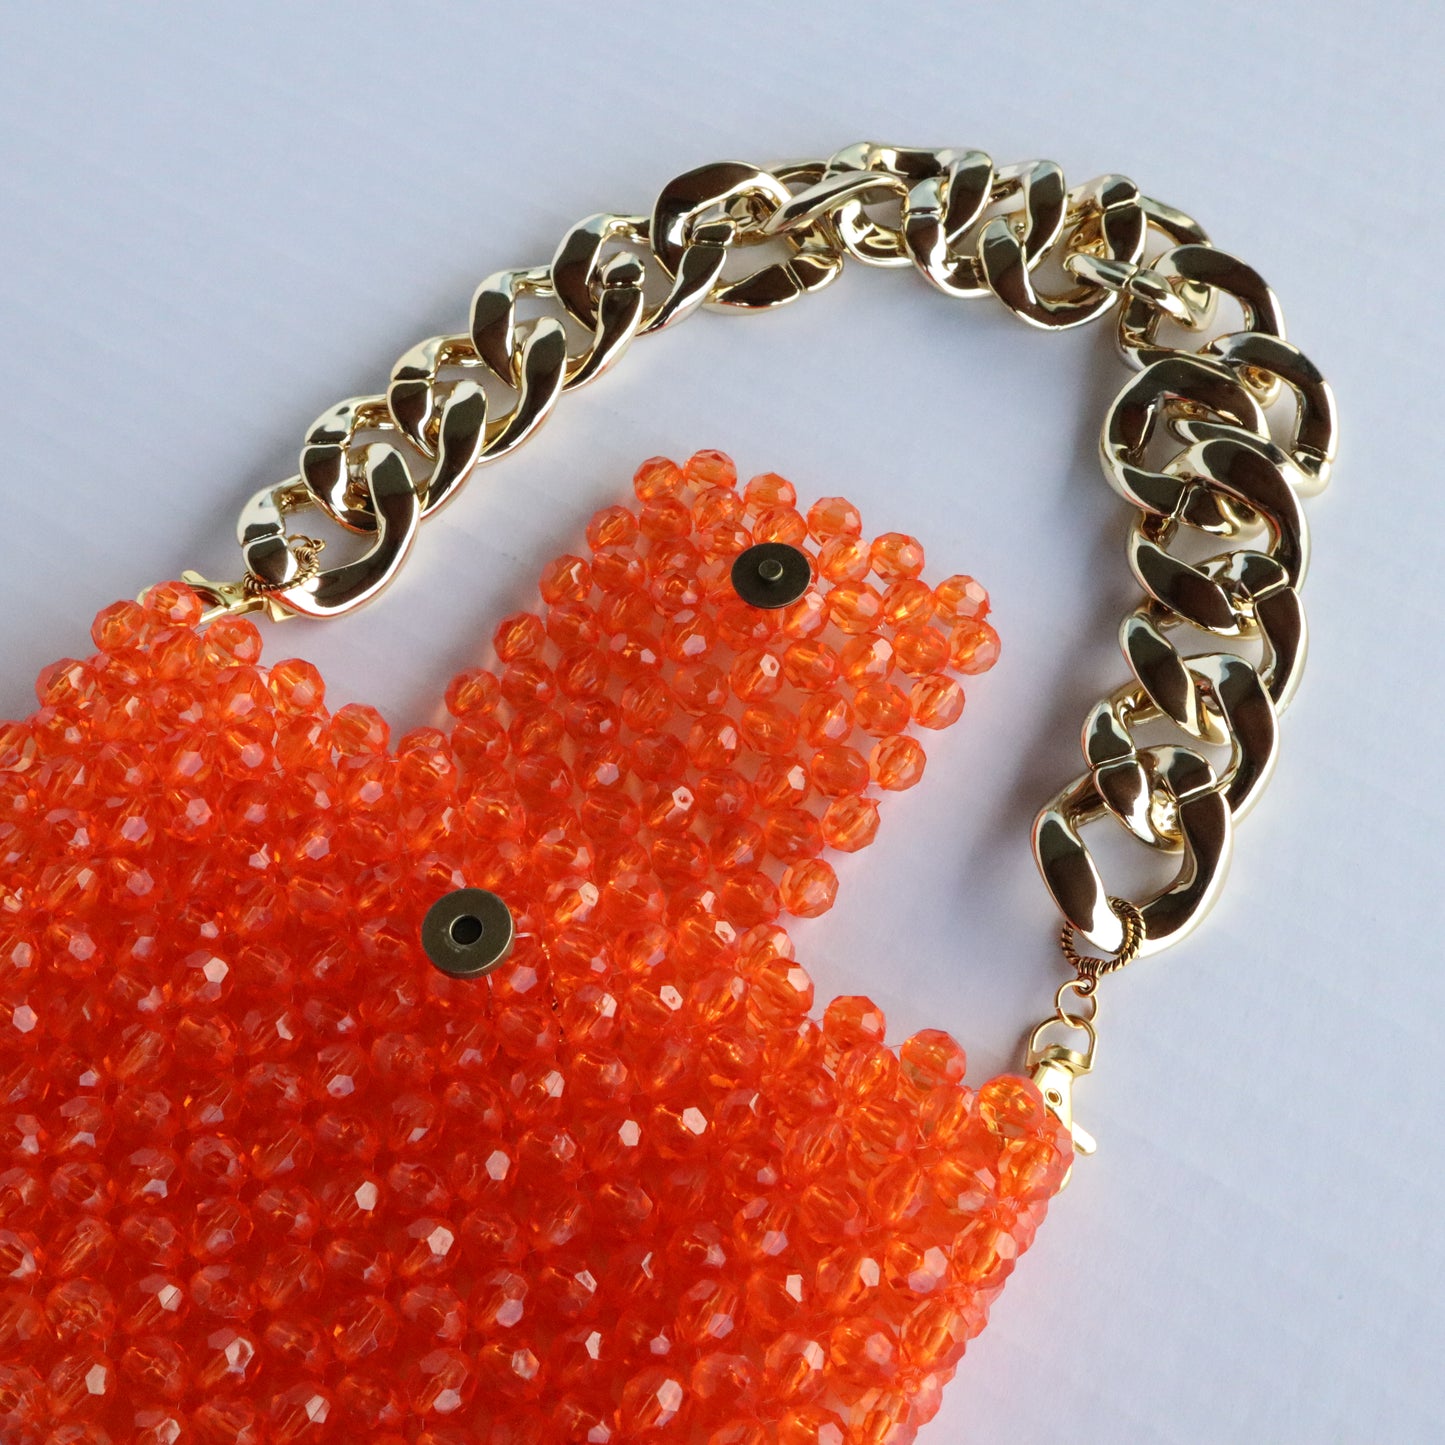 Beaded Purse With Gold Chain Link Strap